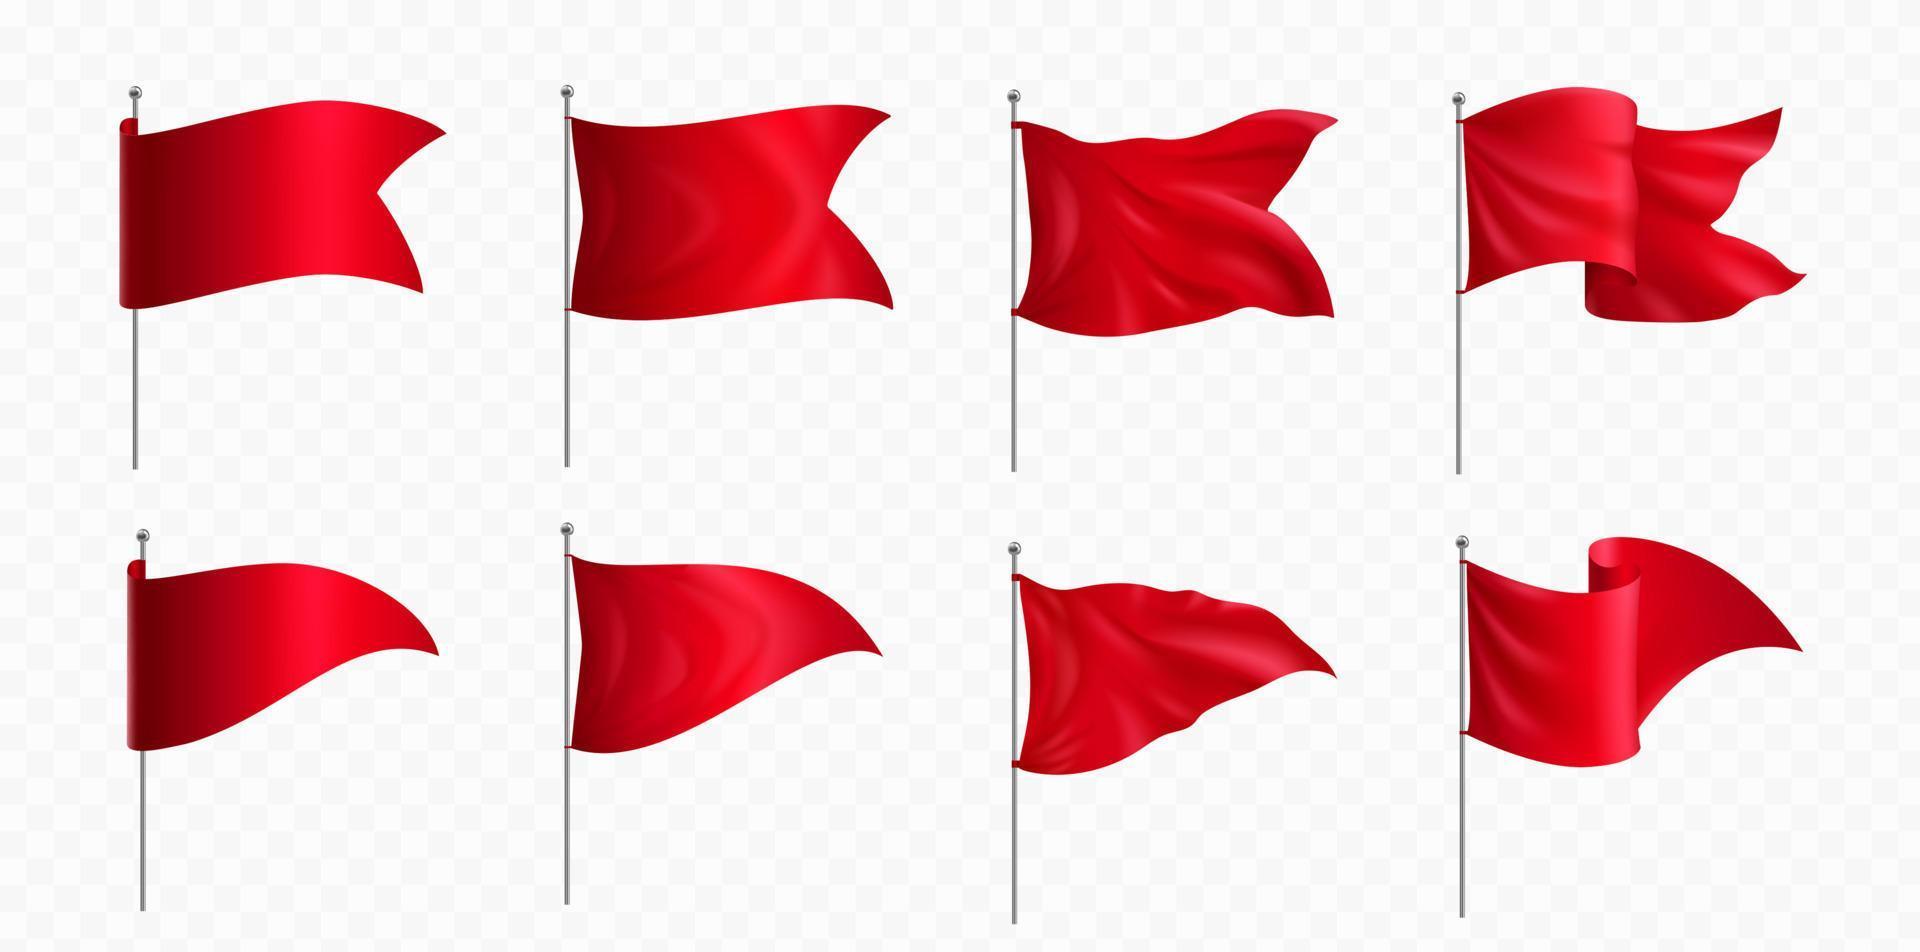 Red flags and pennants on poles mockup vector